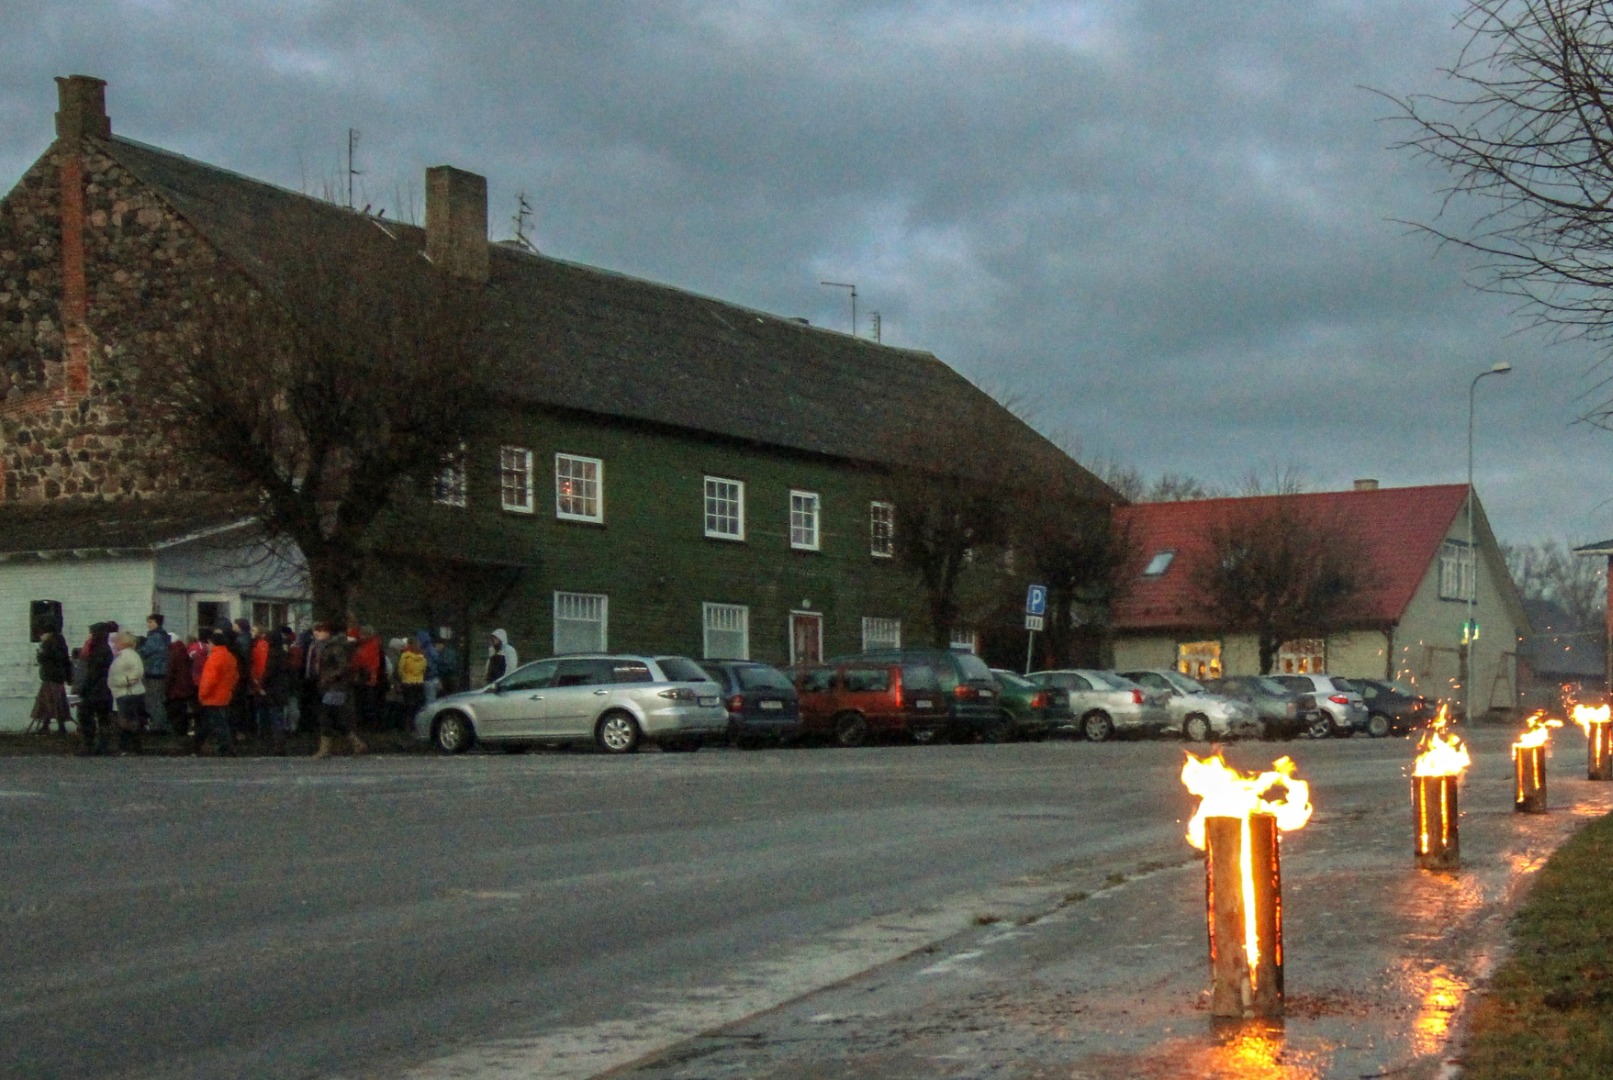 Trucks in Suur-Jaanis in front of Kösti's house, in front of Ford TT rephoto